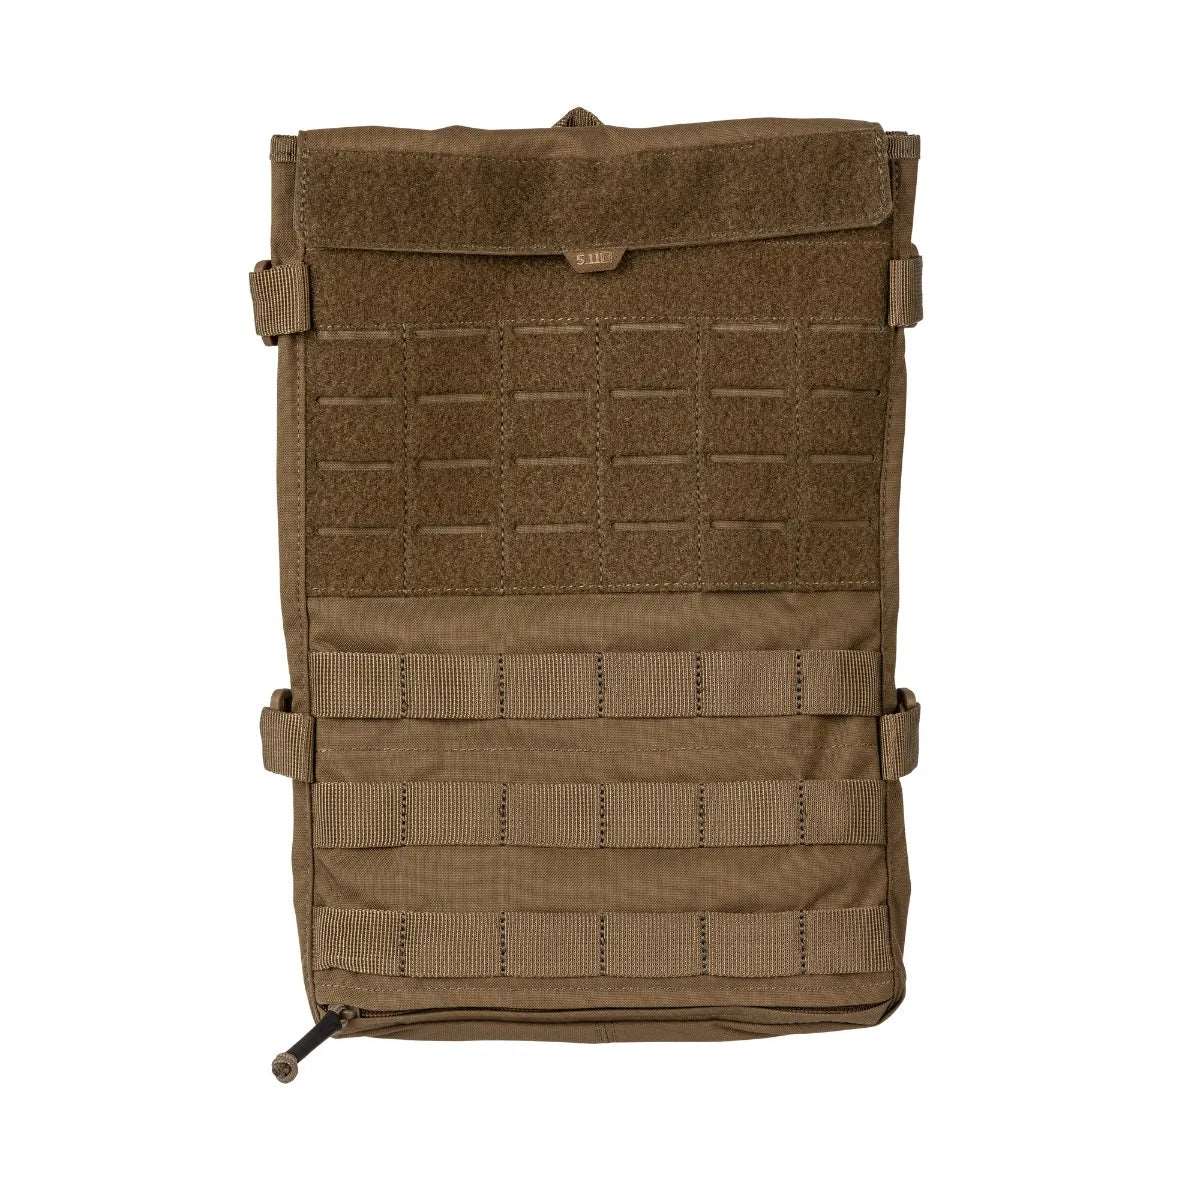 5.11 Tactical PC Convertible Hydration Carrier - Tac Essentials